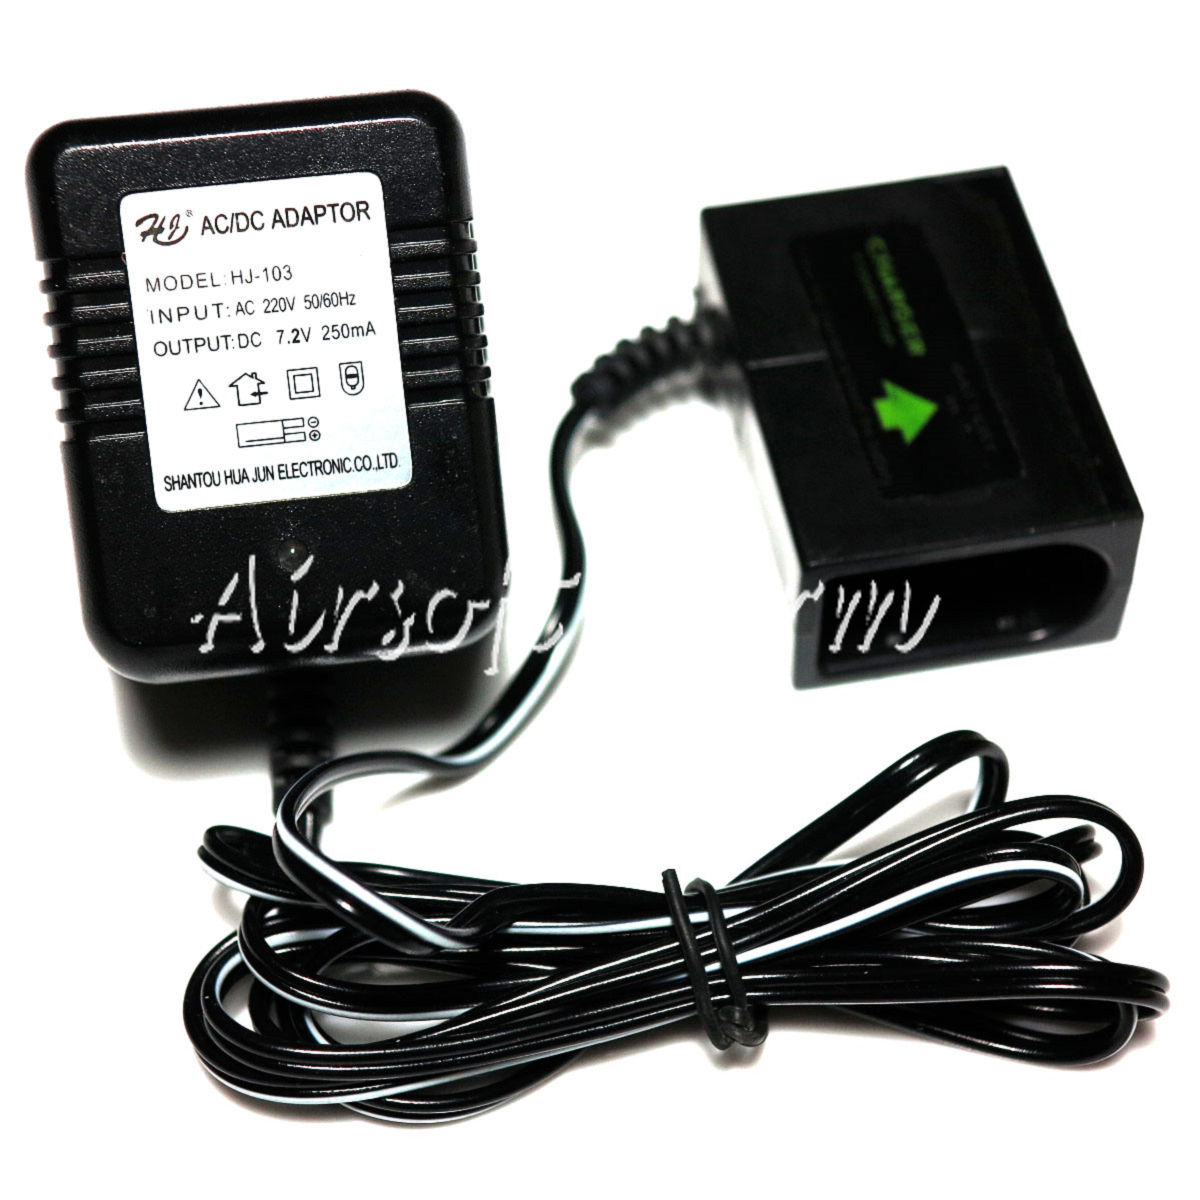 WELL 7.2V Micro Mini Battery Charger for R4 MP7/Marui G18 - Click Image to Close